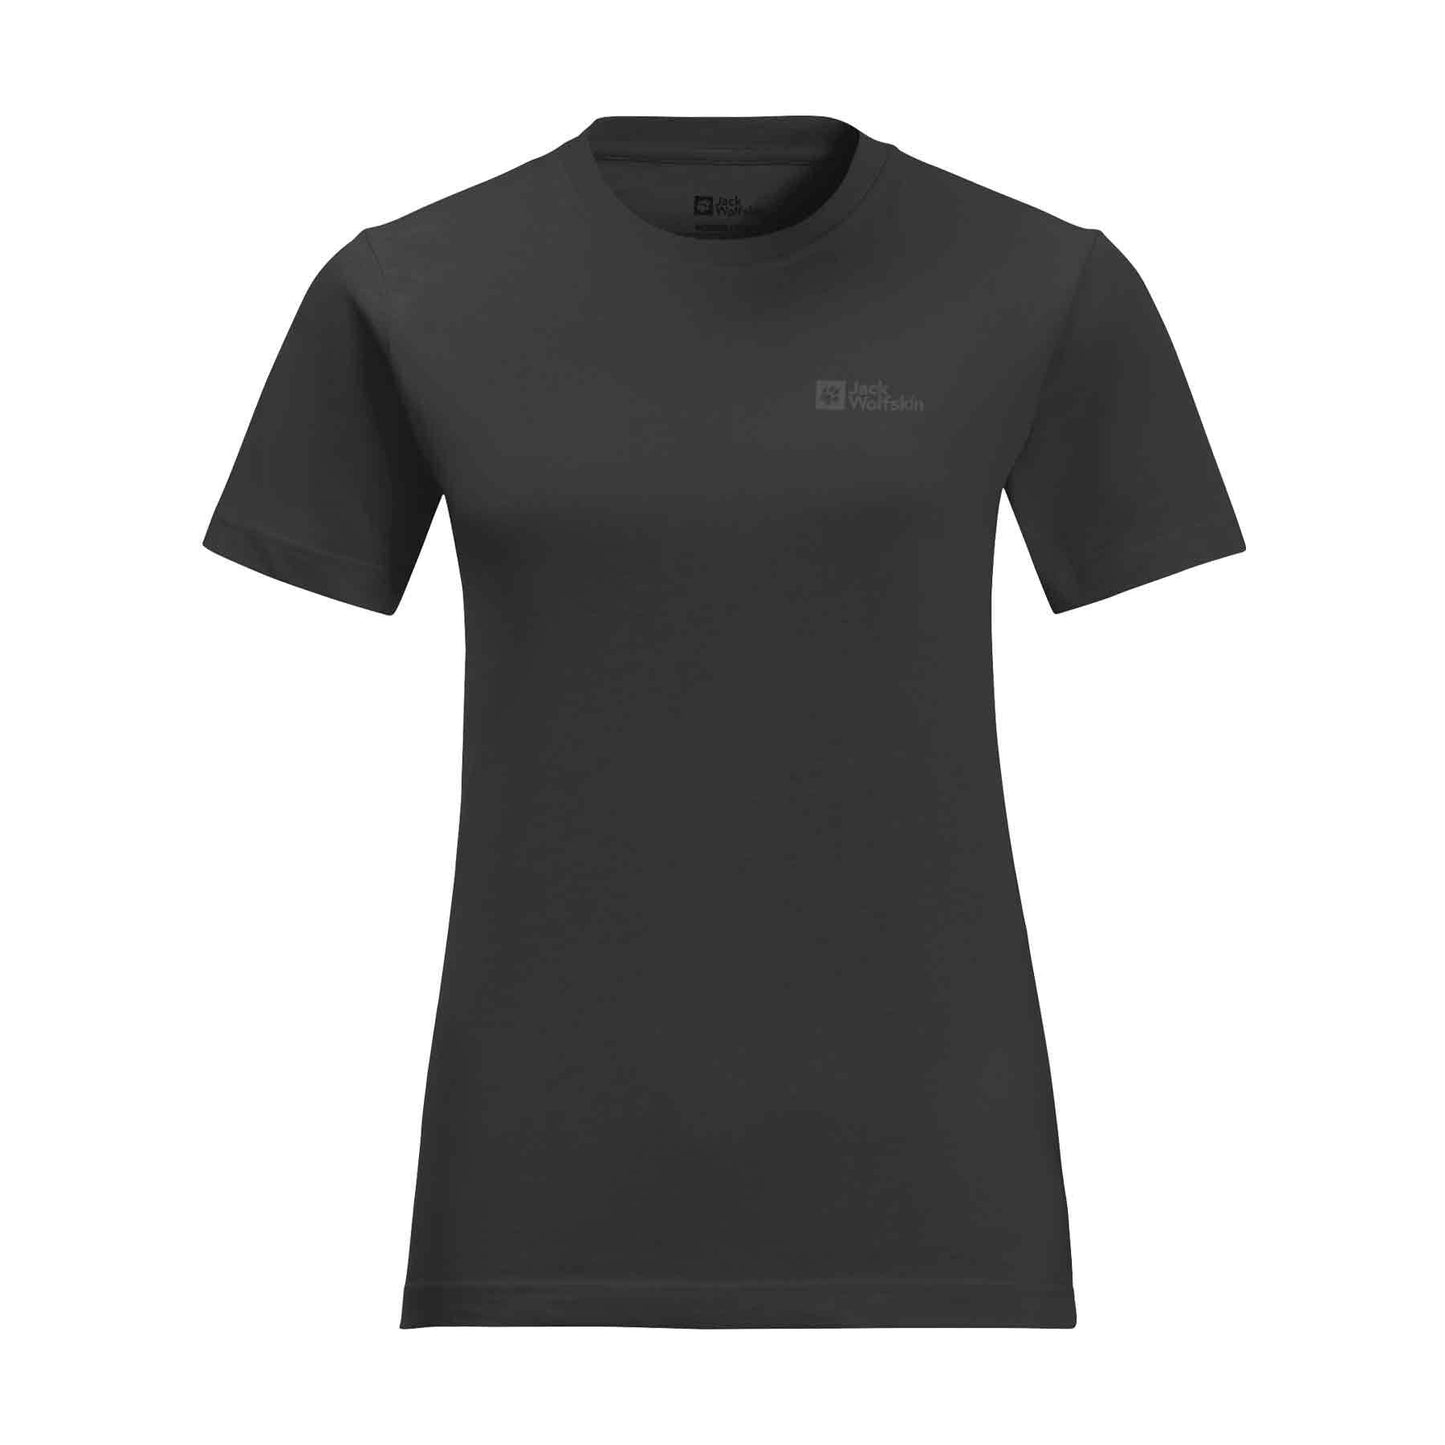 Women’s Essential T by Jack Wolfskin - The Luxury Promotional Gifts Company Limited